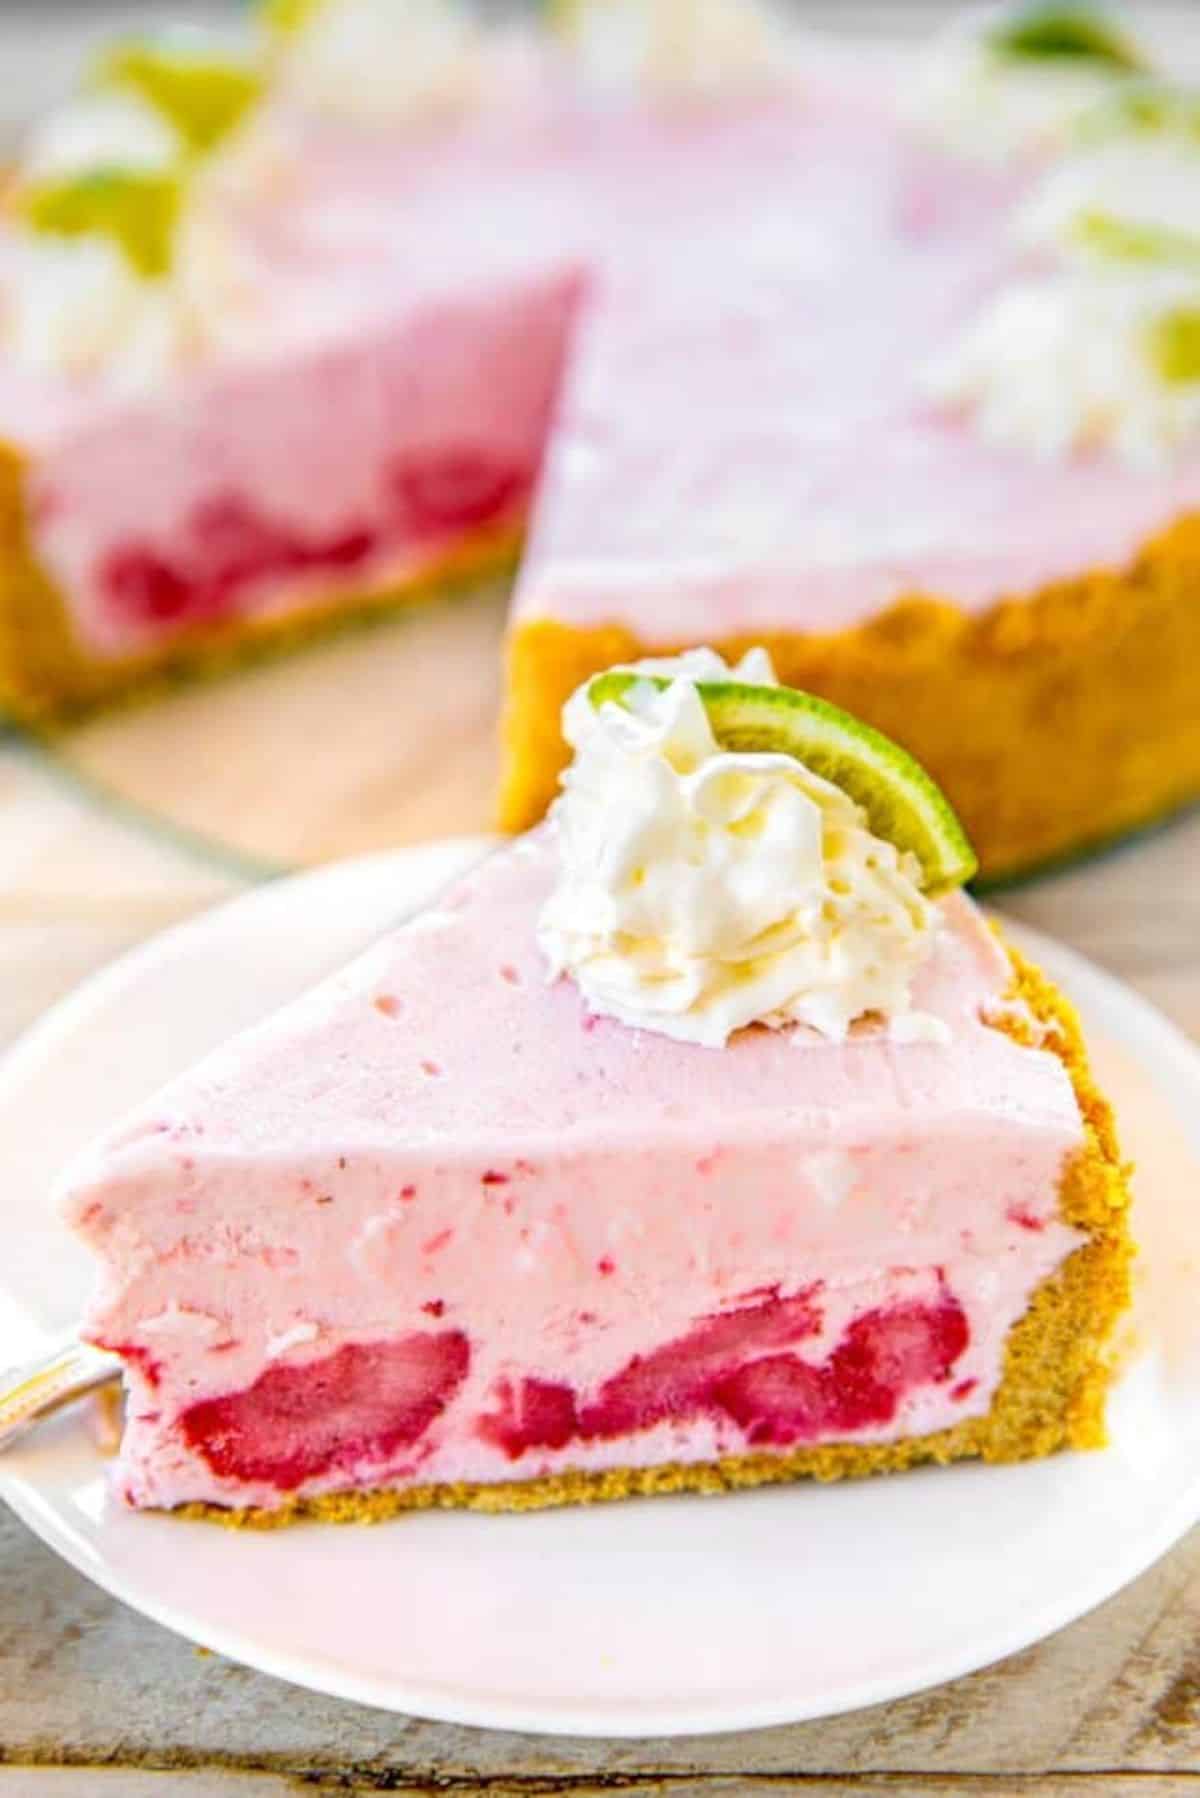 A piece of frozen strawberry margarita pie on a white plate.